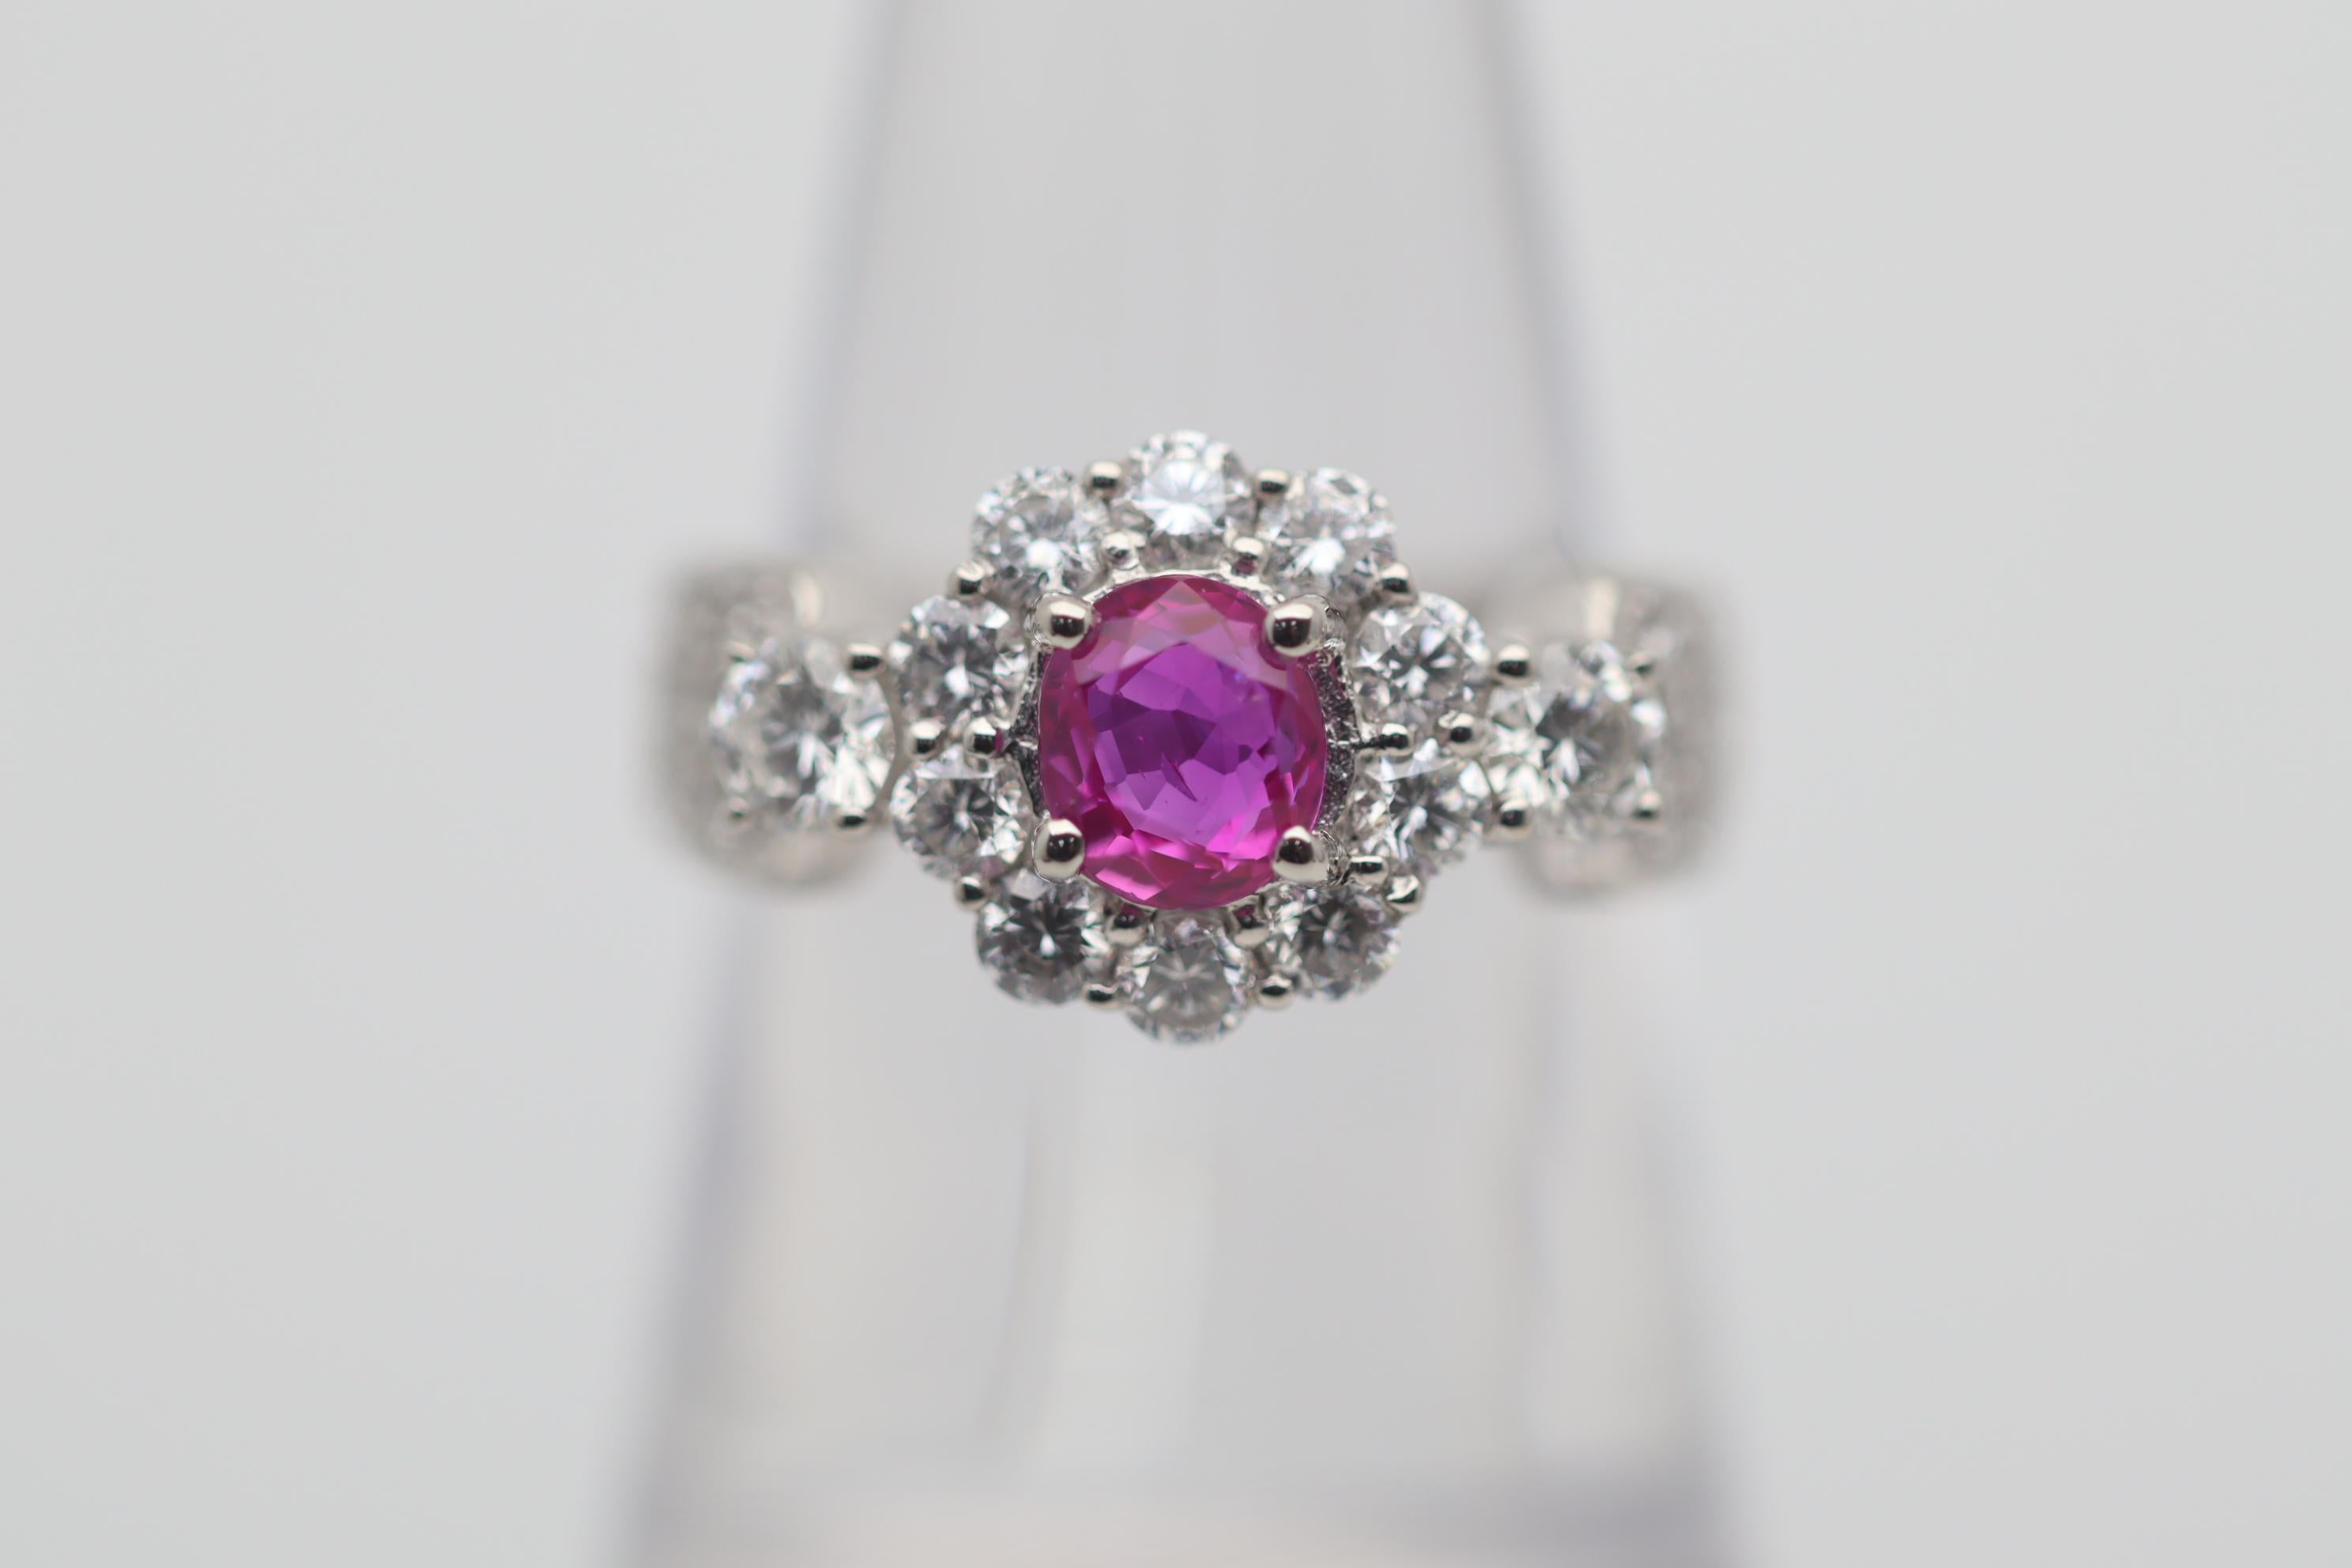 A fine platinum ring featuring a gem Burmese ruby from the famed mines of Mogok. The ruby weighs 1.07 carats and has an intense vivid pinkish-red color which glows in the light. Adding to that, the ruby is certified by the GIA as natural with a